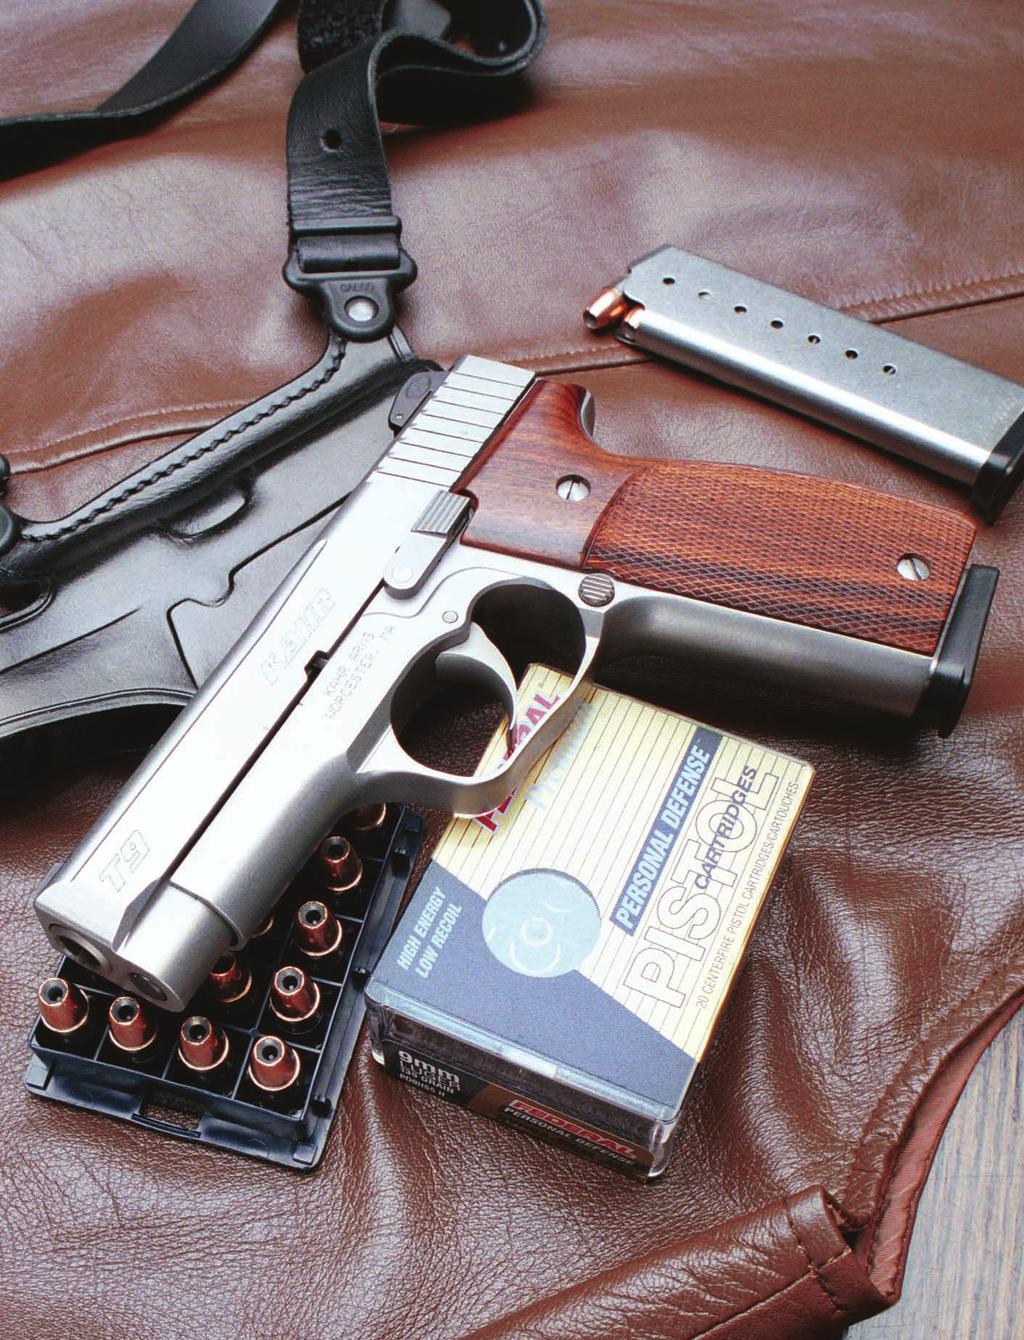 front tritium night sight 8-round 8-round "Thus, in my estimation, the crown jewel of SHOT Show 2002 is the latest Kahr Arms handgun, the new, larger Target.